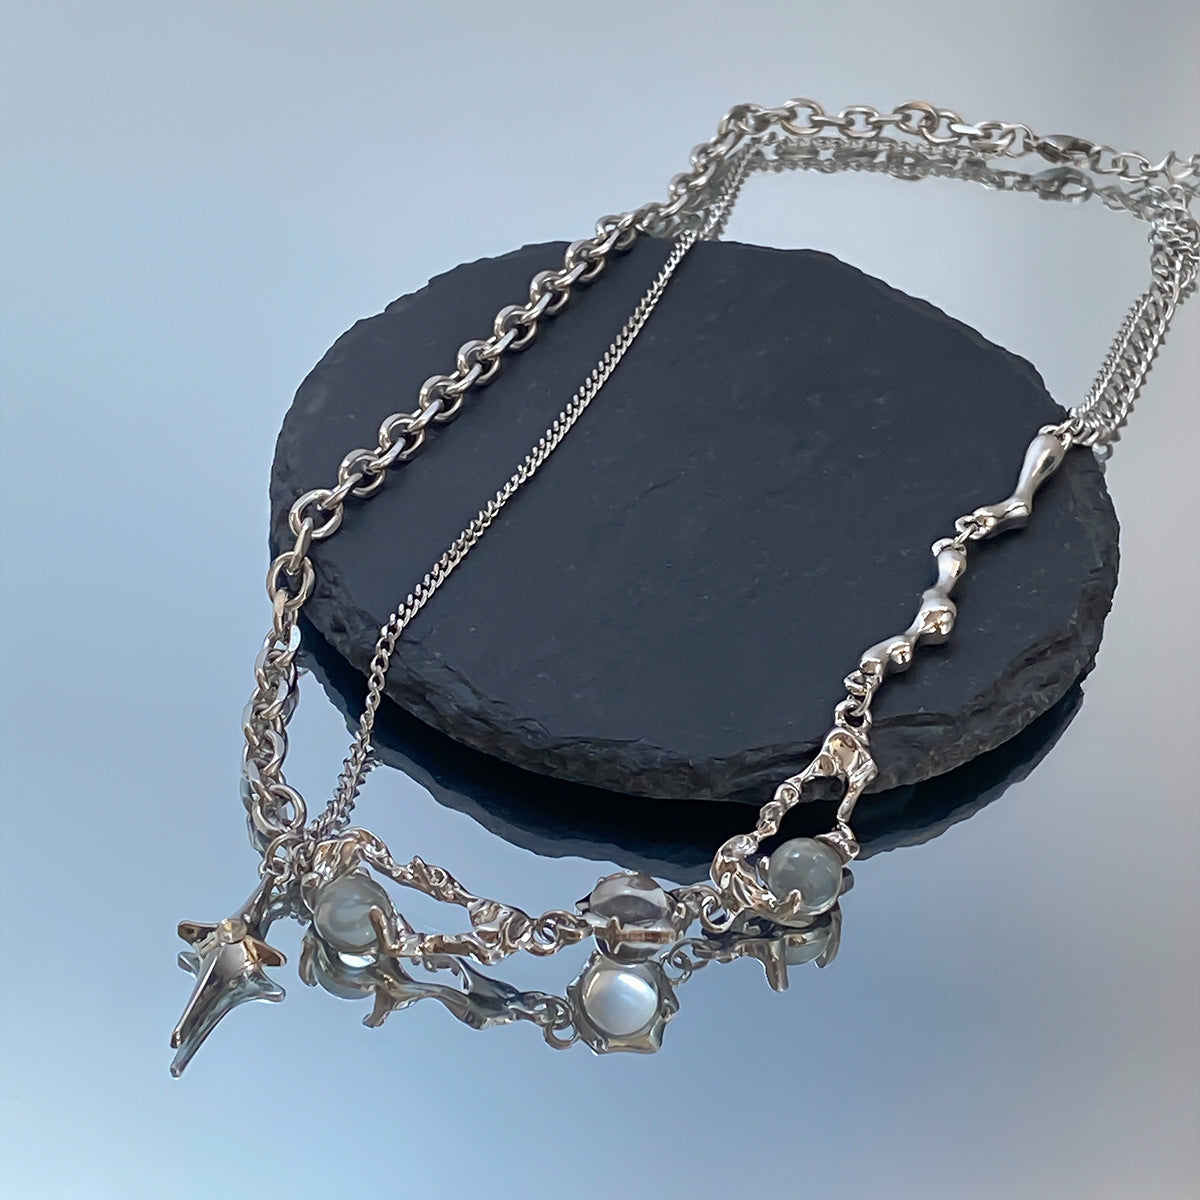 Thorny Charm Necklace